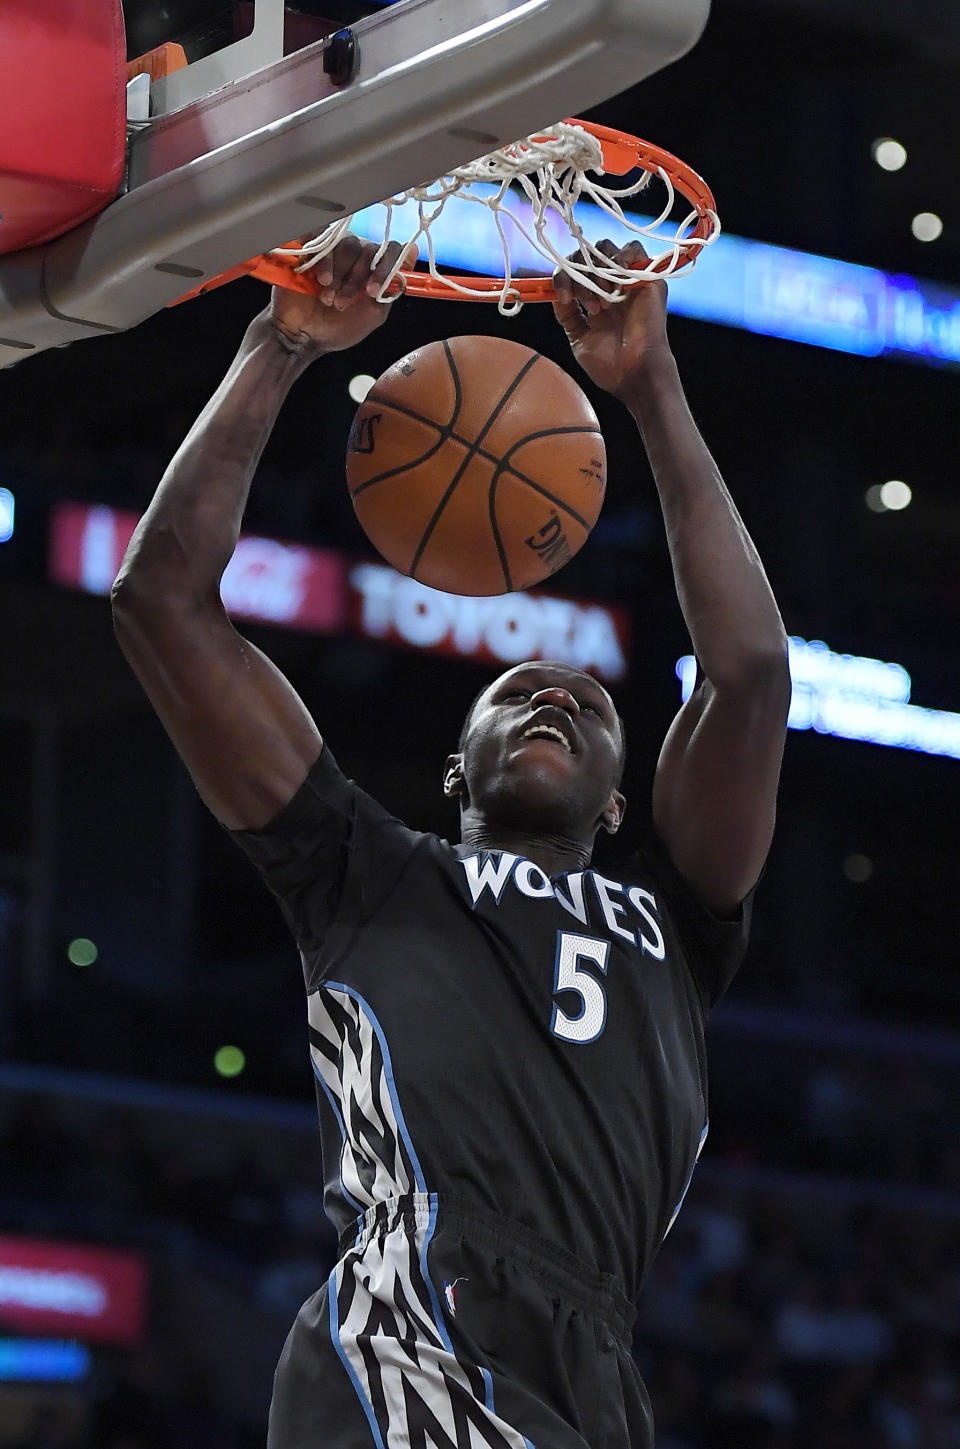 Minnesota Timberwolves forward Gorgui Dieng, of Senegal, dunks during the first half of an NBA basketball game against the Los Angeles Lakers, Sunday, April 9, 2017, in Los Angeles. (AP Photo/Mark J. Terrill)